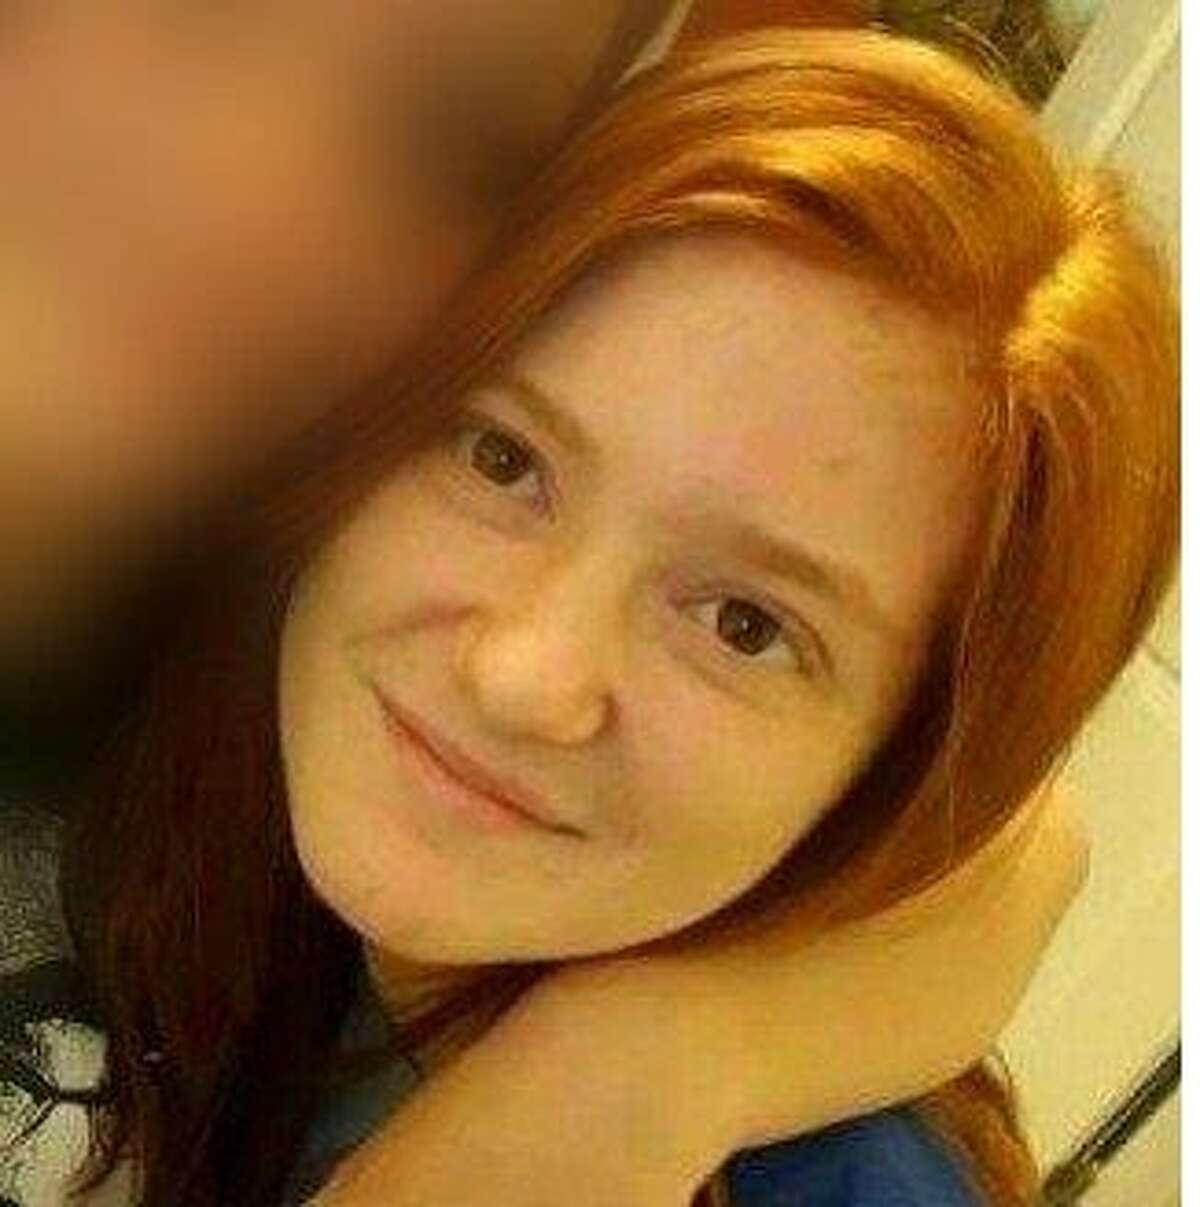 Alexis Paige Taylor, 16, of Lake Charles.